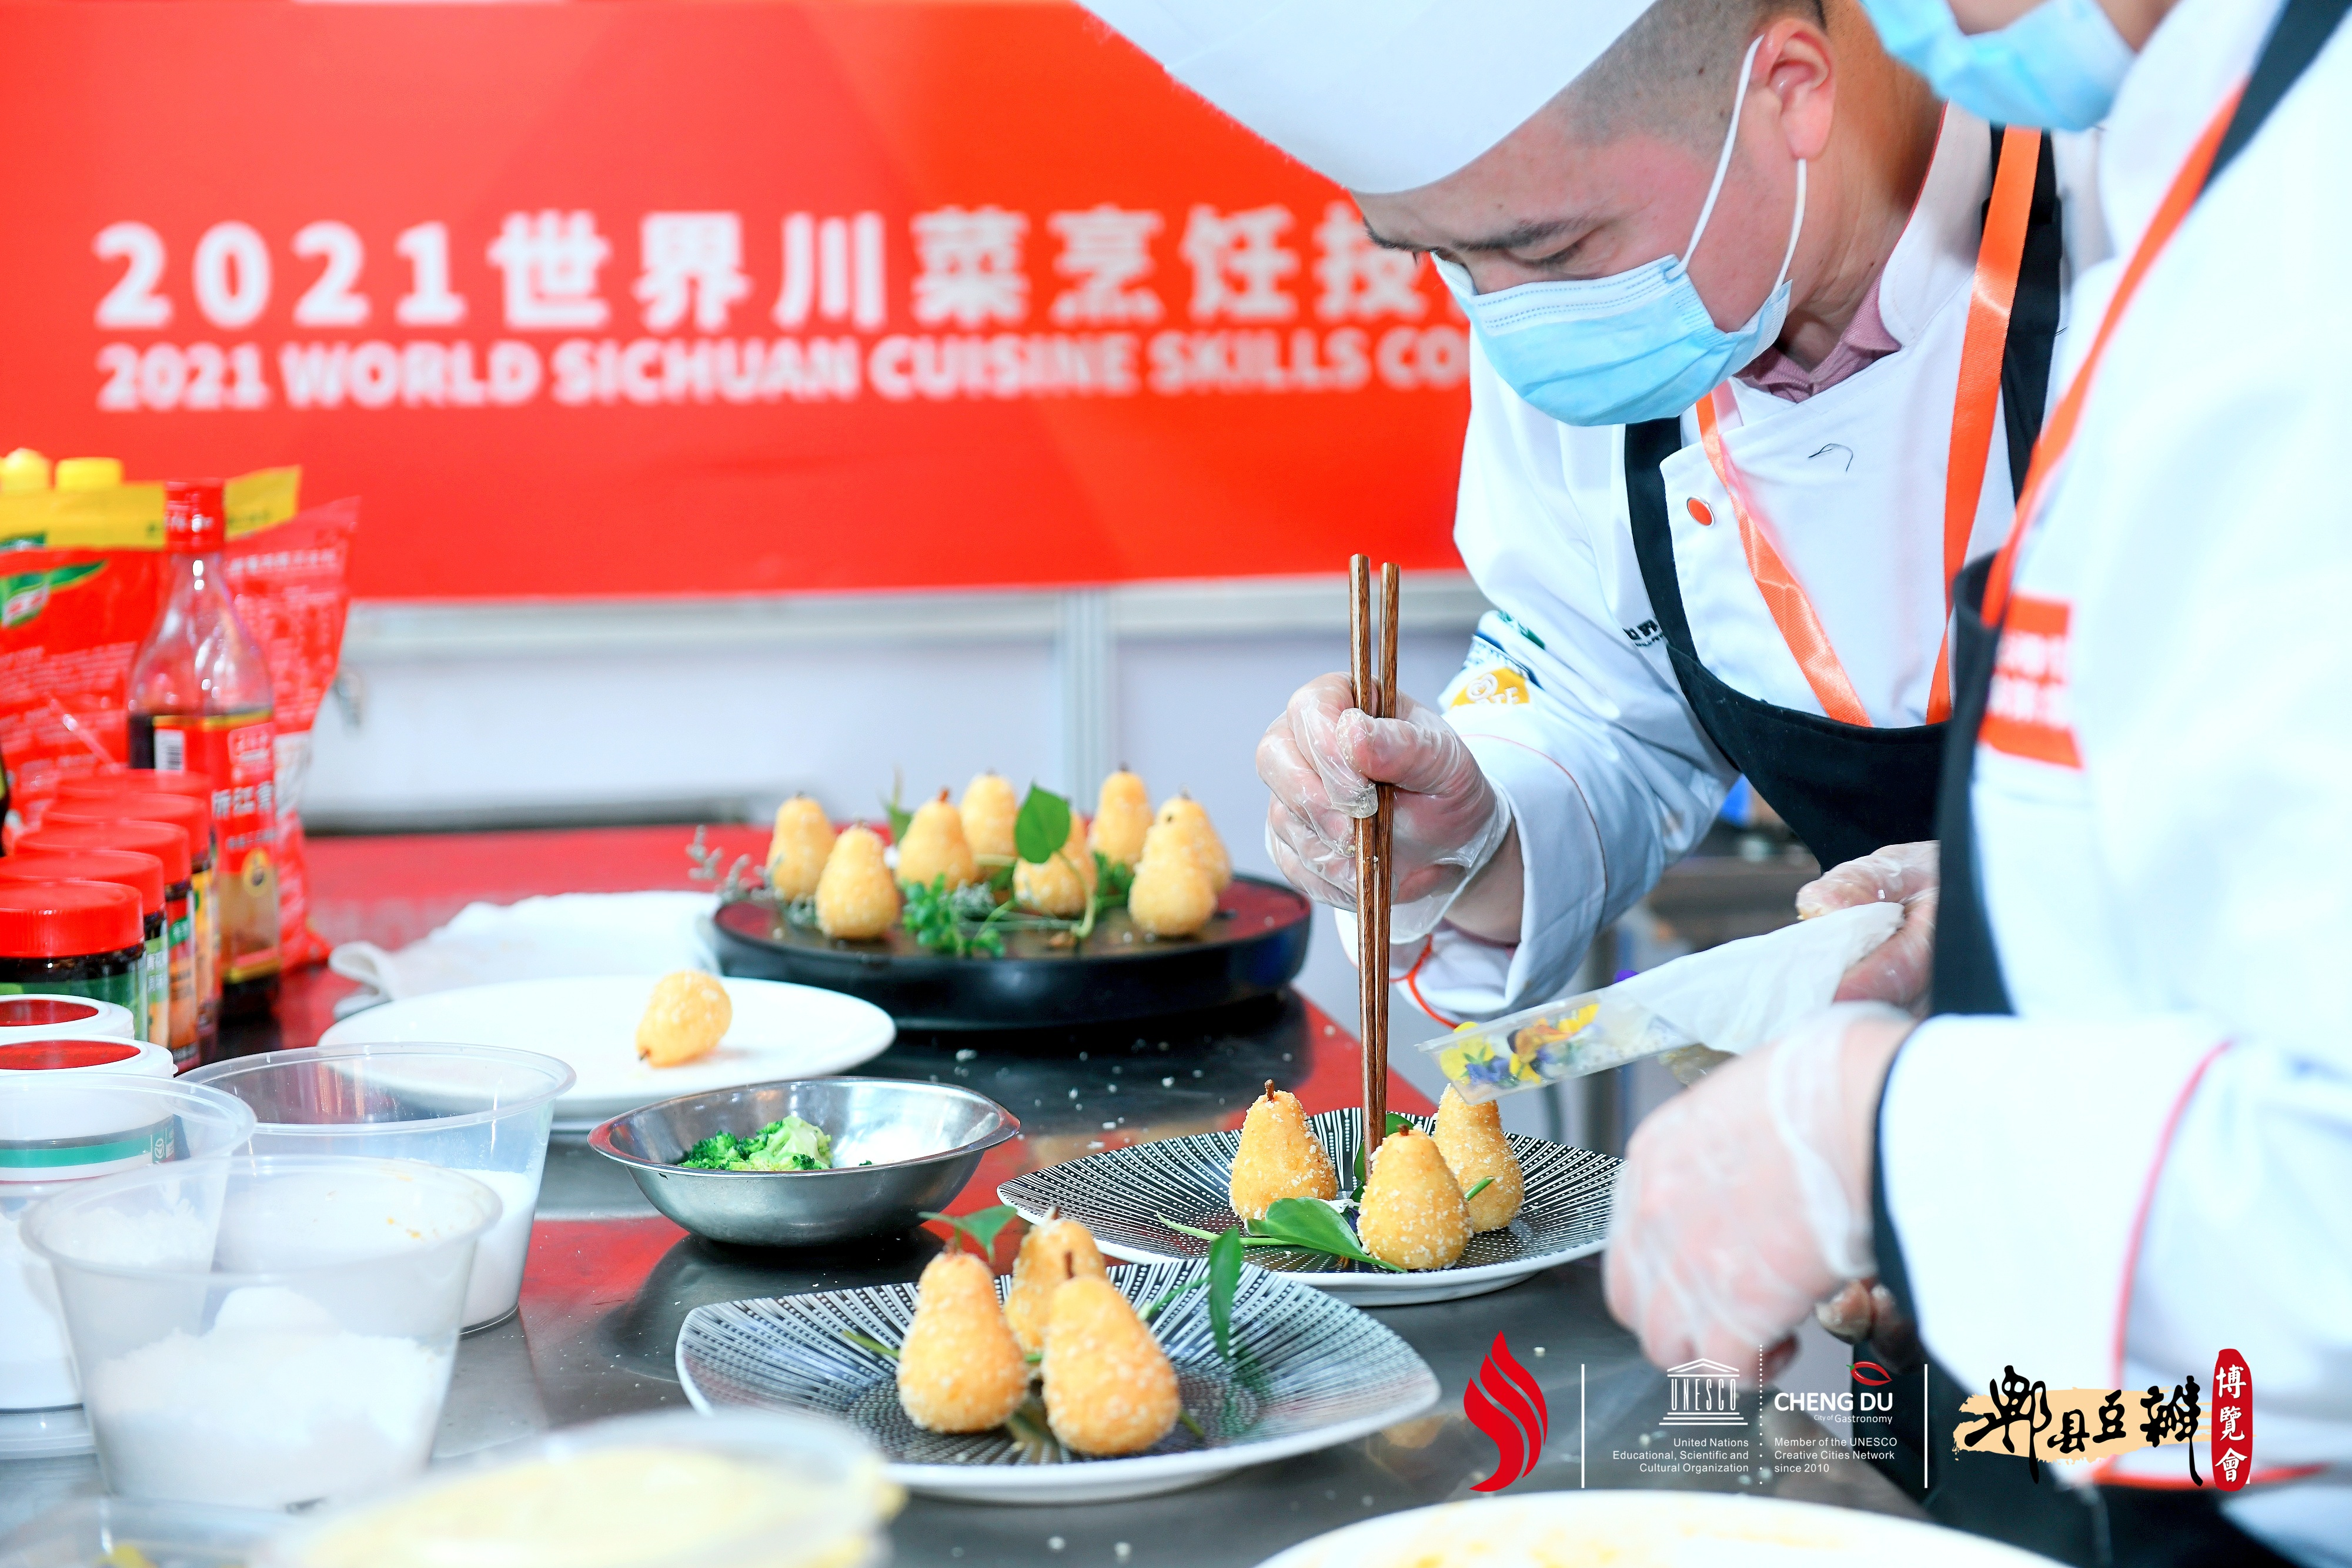 The 4th World Sichuan Cuisine Conference, 2021 International Food Festival of Chengdu and the 9th Pixian Douban Expo Commence in Chengdu